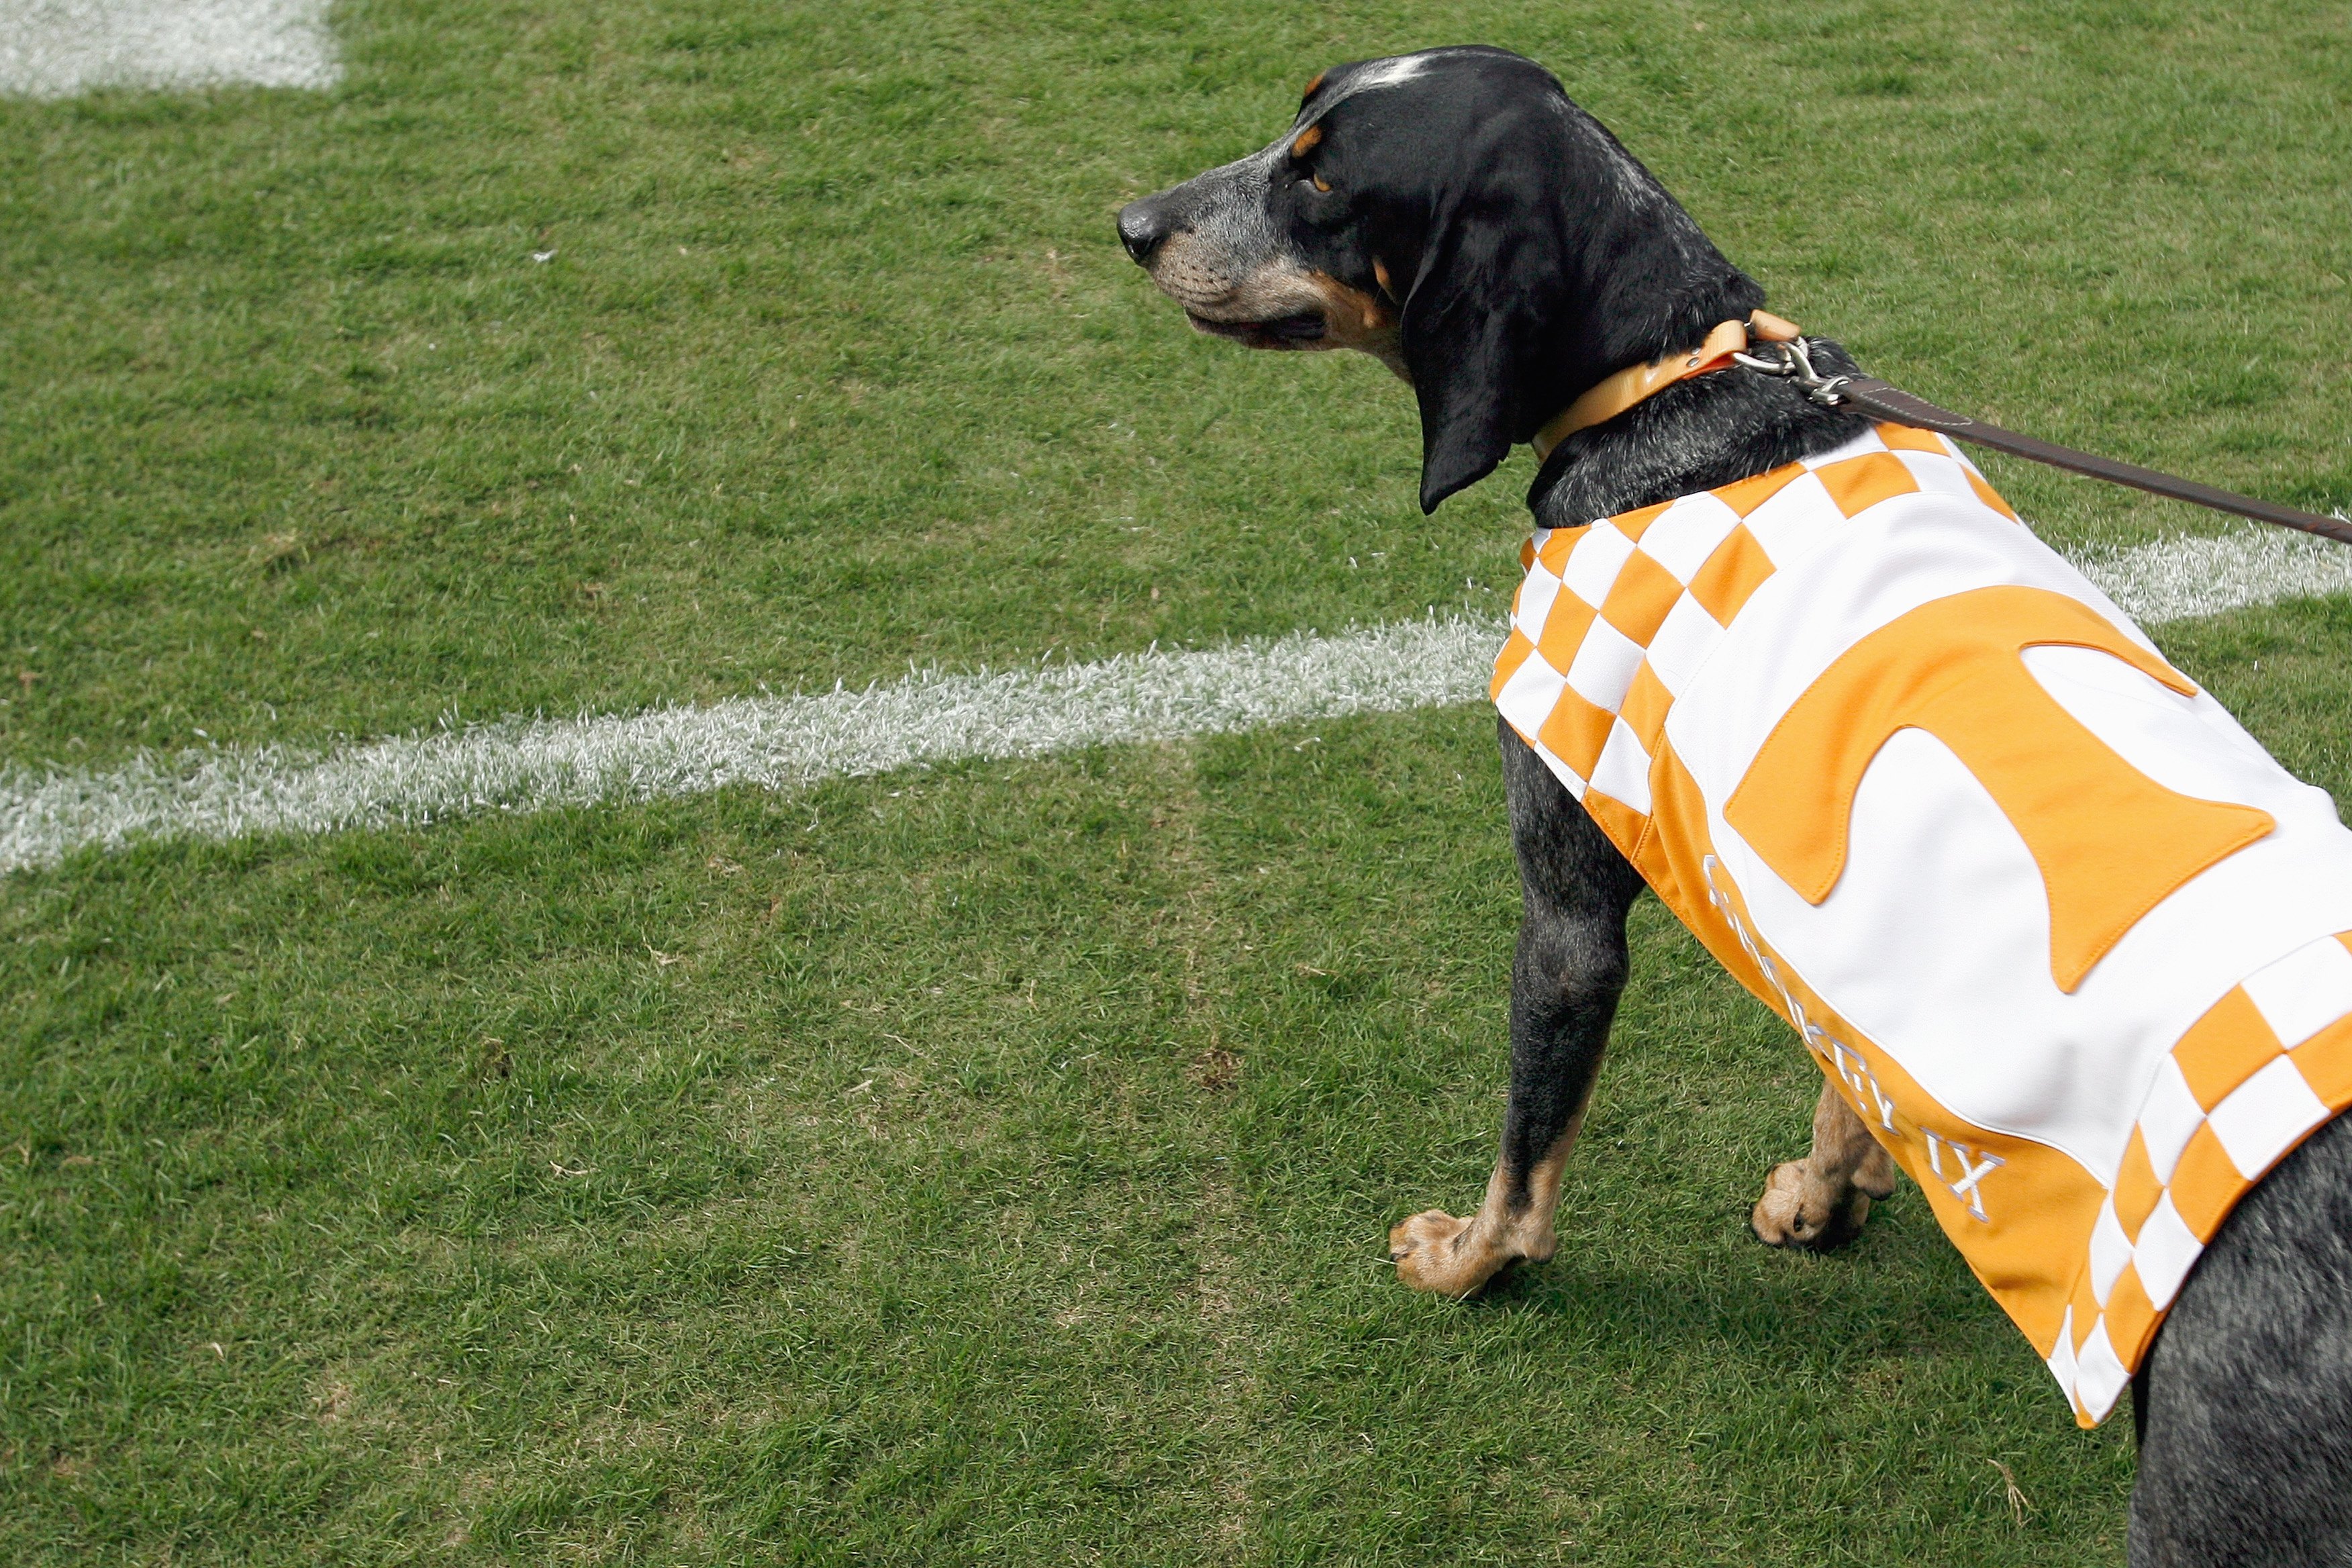 ATHENS, GA - OCTOBER 11:  Smokey IX mascot of the Tennessee Volunteers sits on the sidelines during the game against the Georgia Bulldogs at Sanford Stadium on October 11, 2008 in Athens, Georgia.  (Photo by Kevin C. Cox/Getty Images)